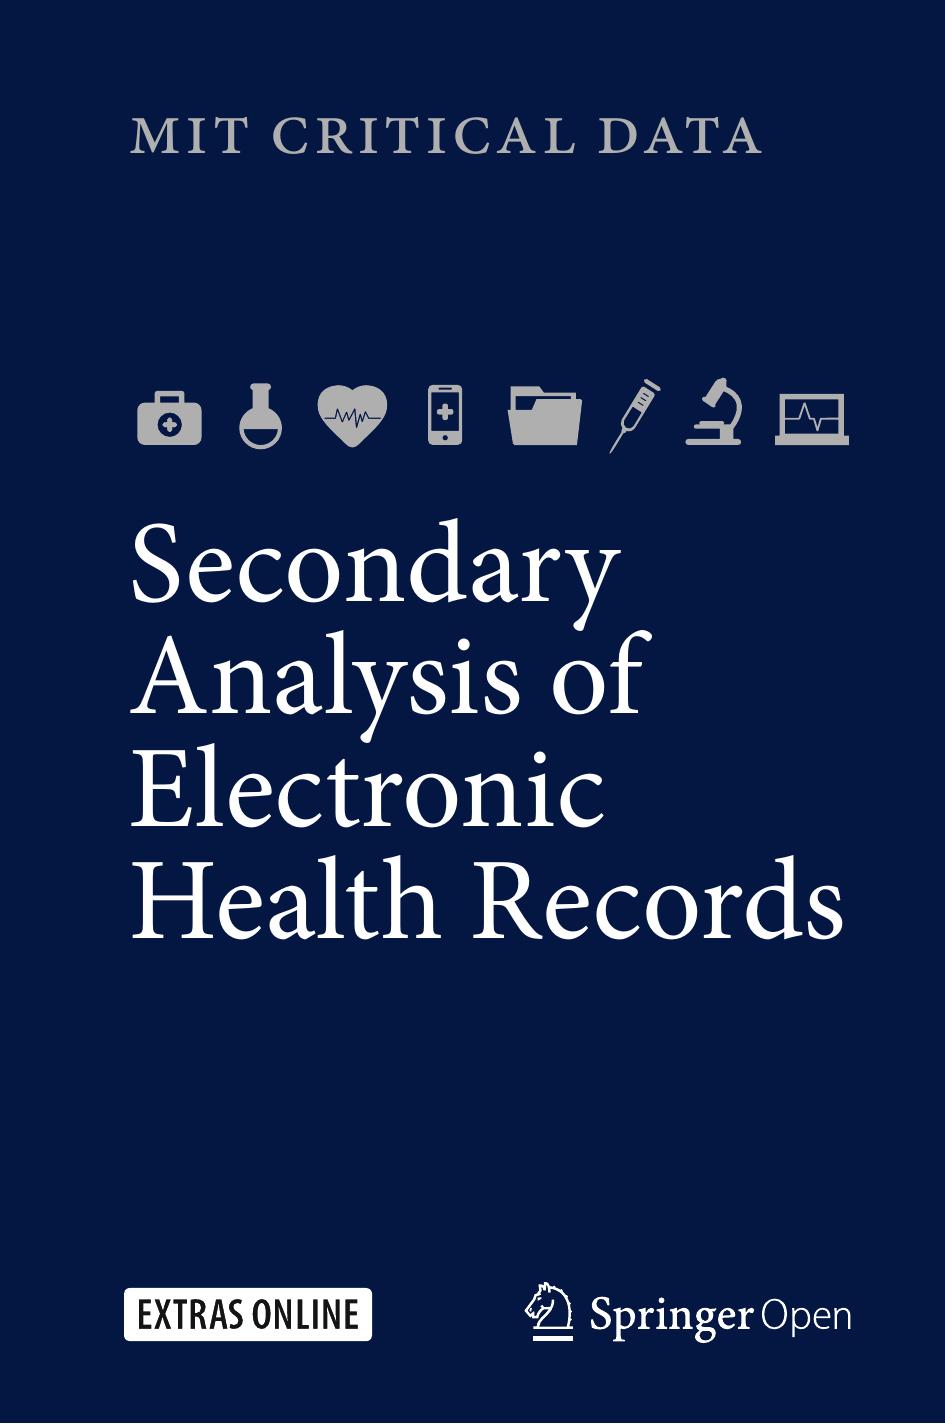 Secondary Analysis of Electronic Health Records by MIT Critical Data